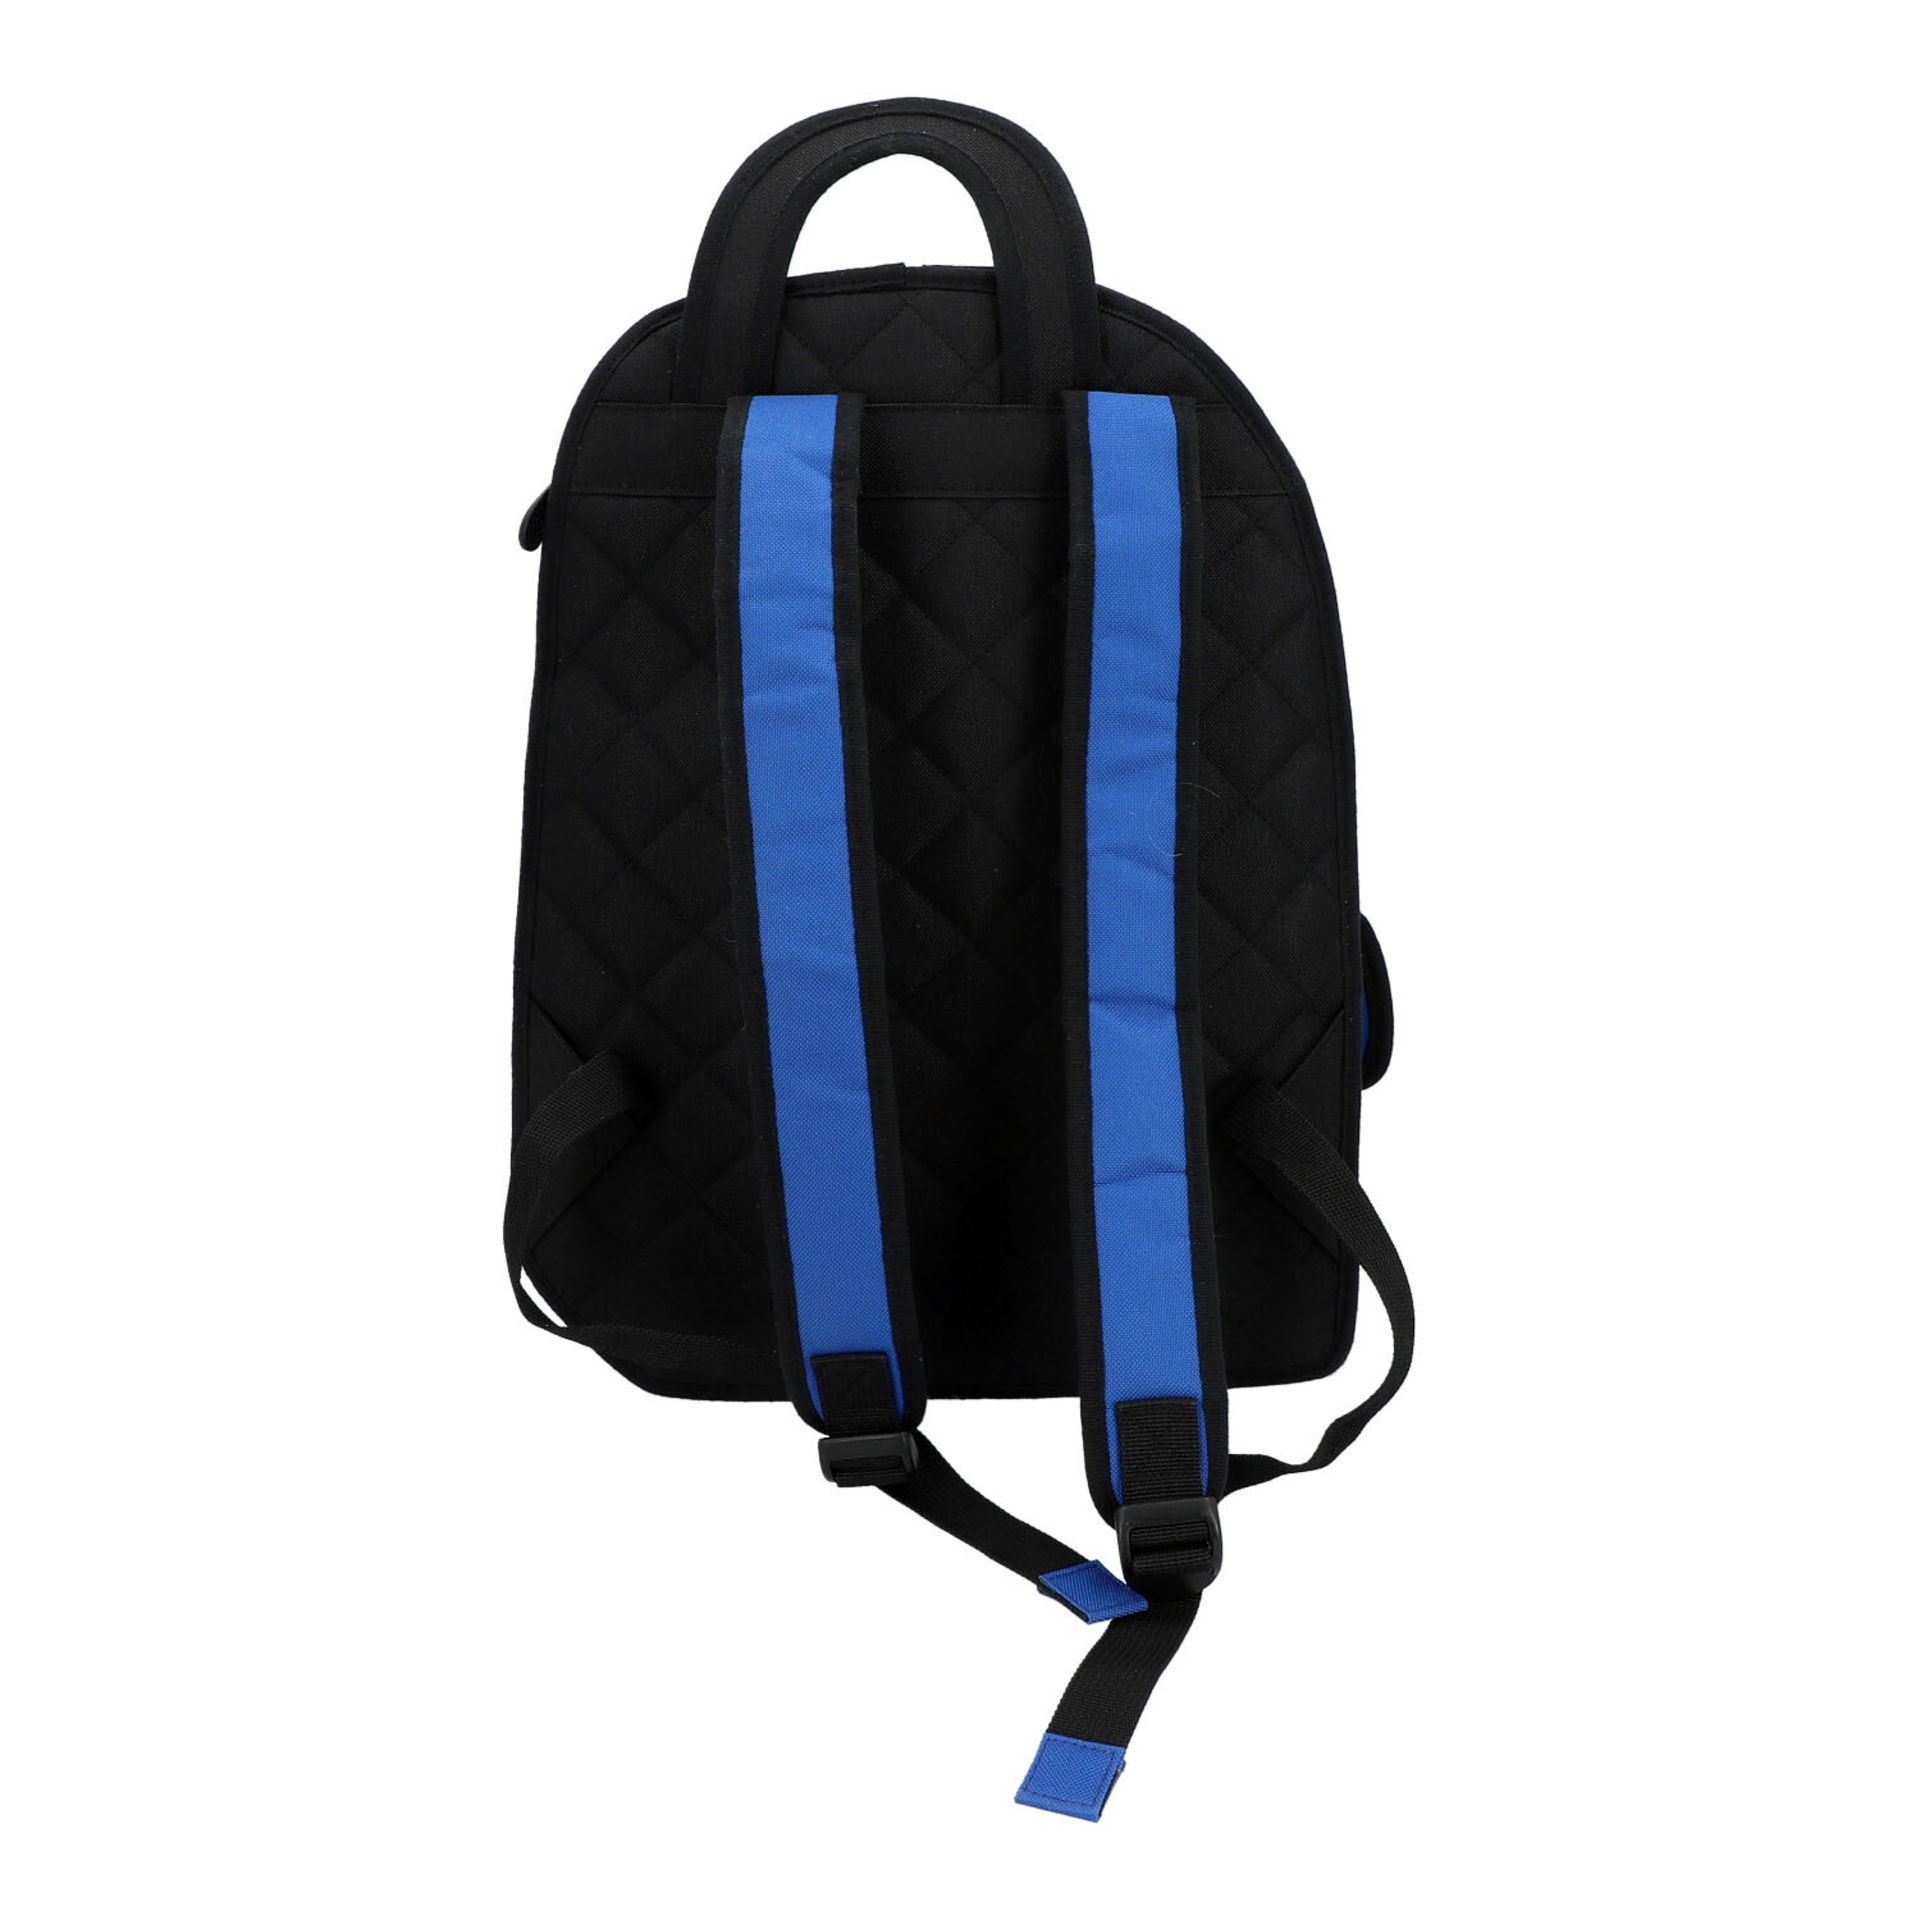 JUMP FROM PAPER Rucksack "ADVENTURE BACKPACK". - Image 4 of 8